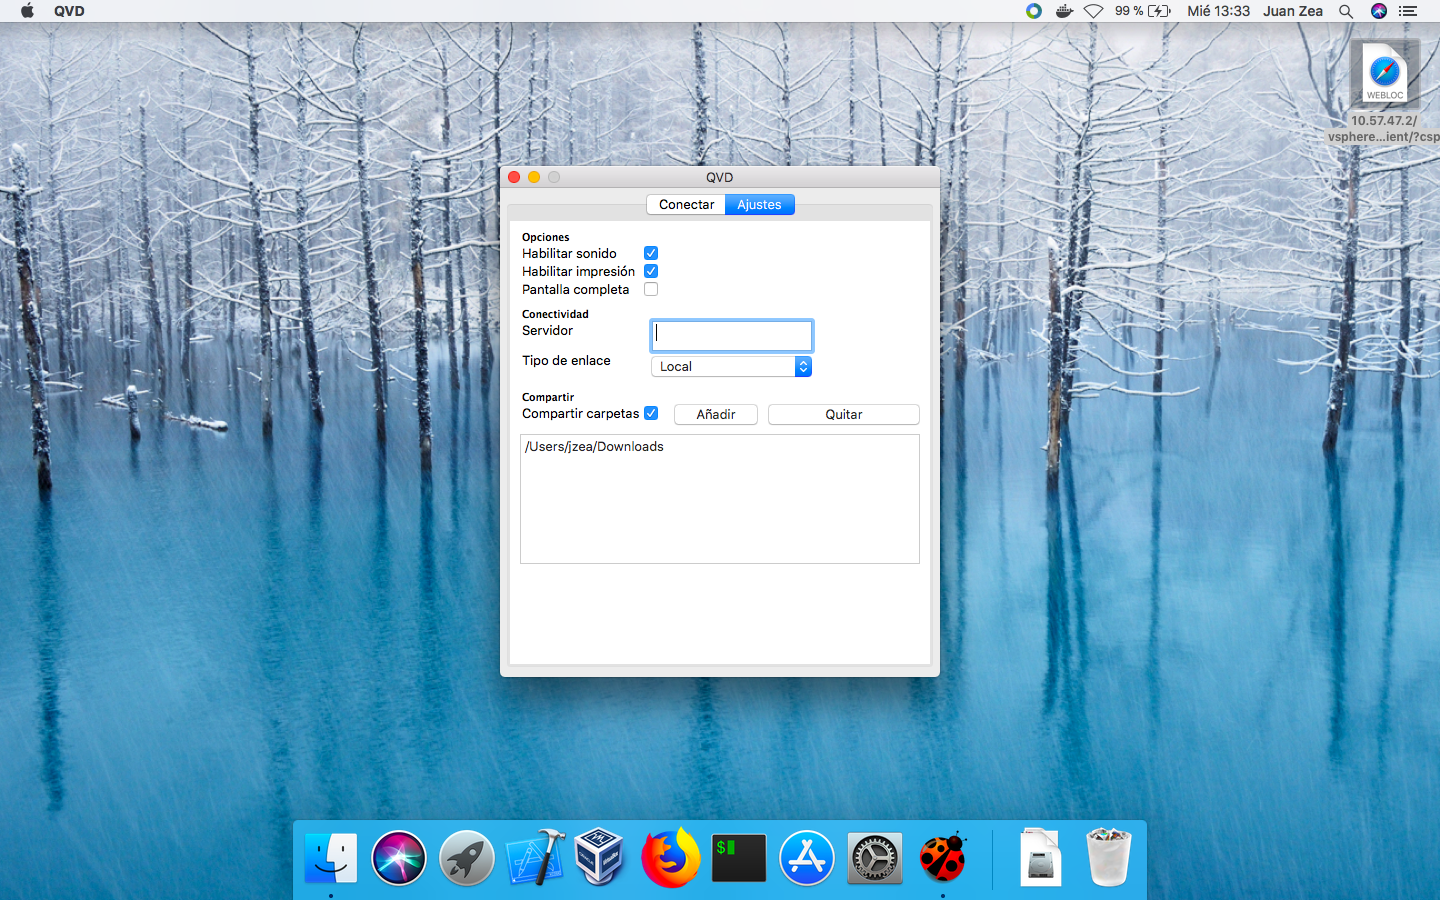 Settings tab in the QVD Client for Mac OS